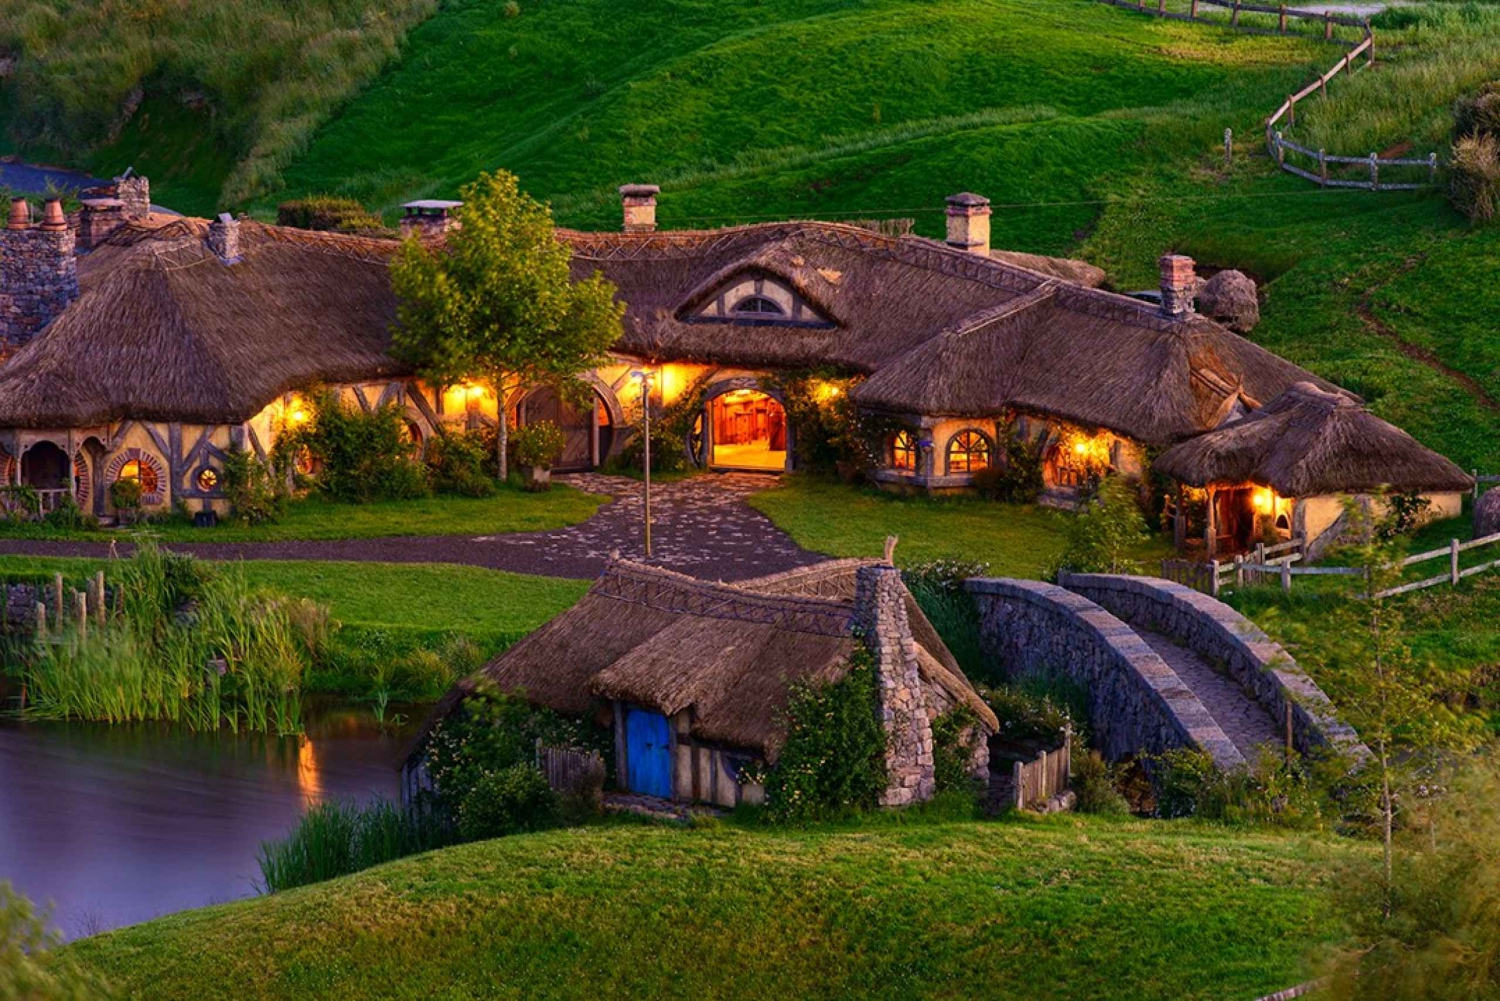 From Auckland: Hobbiton Movie Set Full-Day Trip